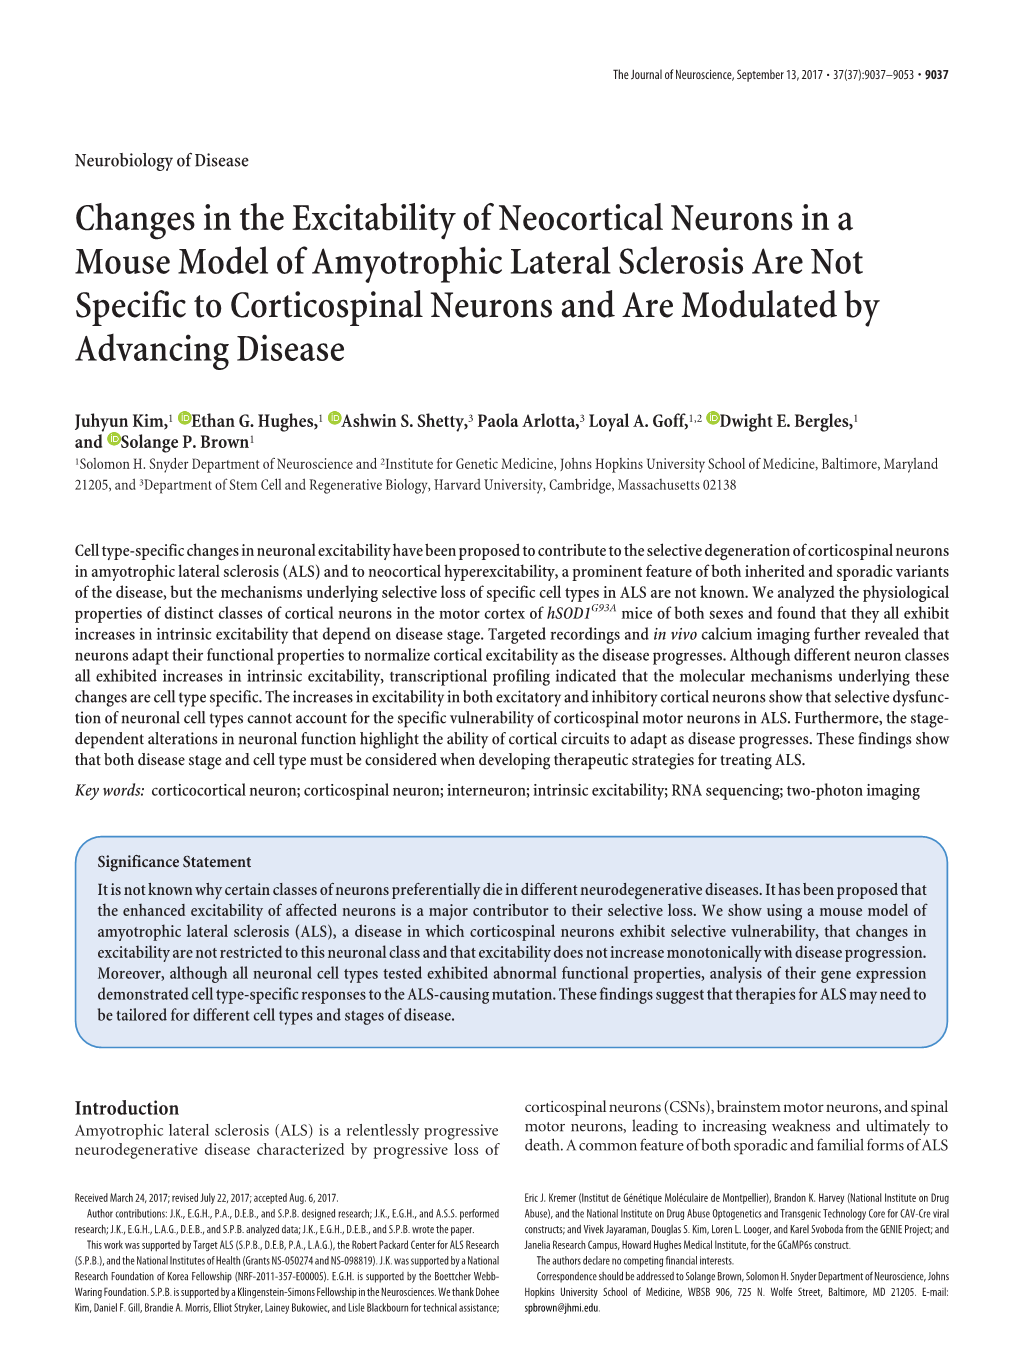 Changes in the Excitability of Neocortical Neurons in a Mouse